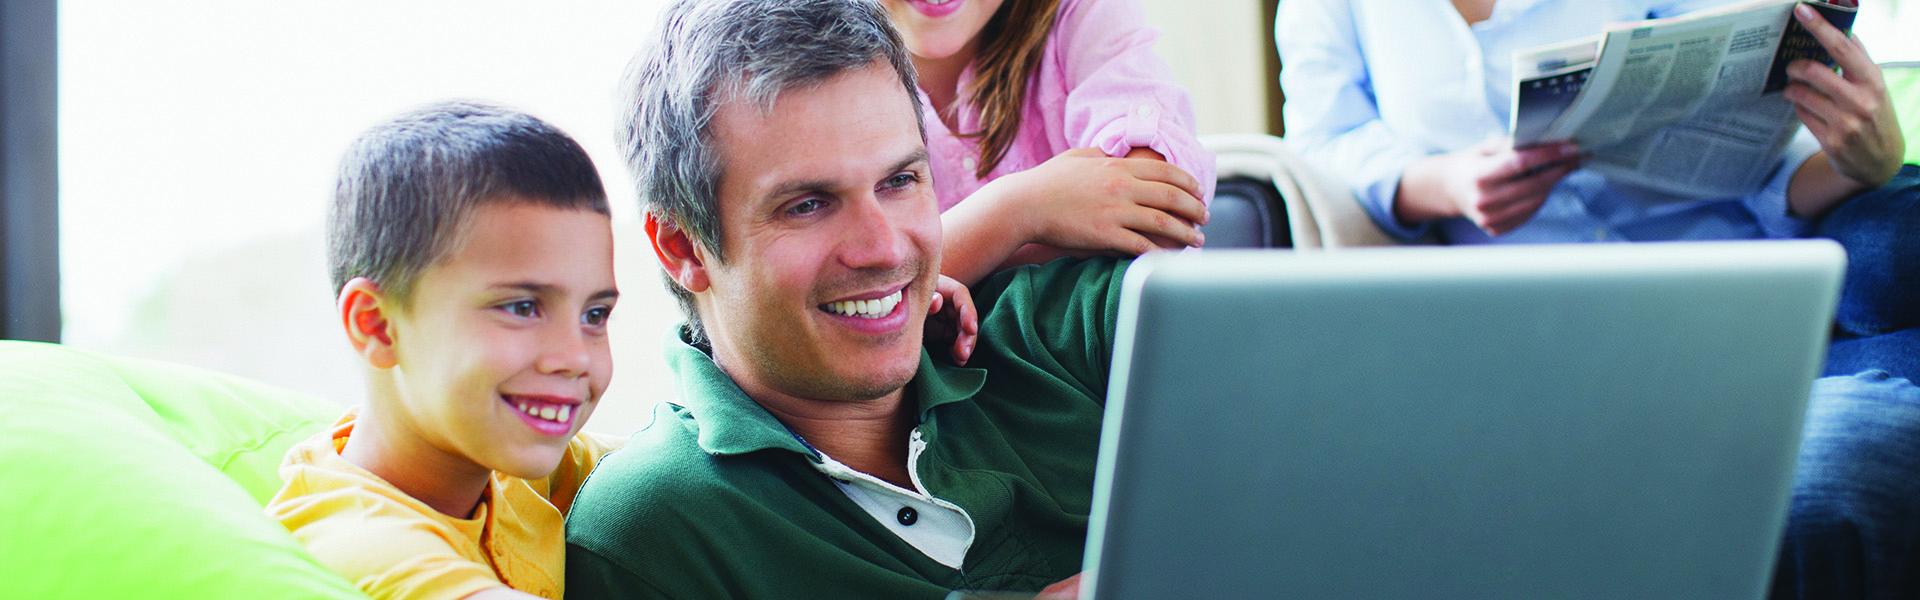 A man and a little boy and girl looking at a laptop, and smiling